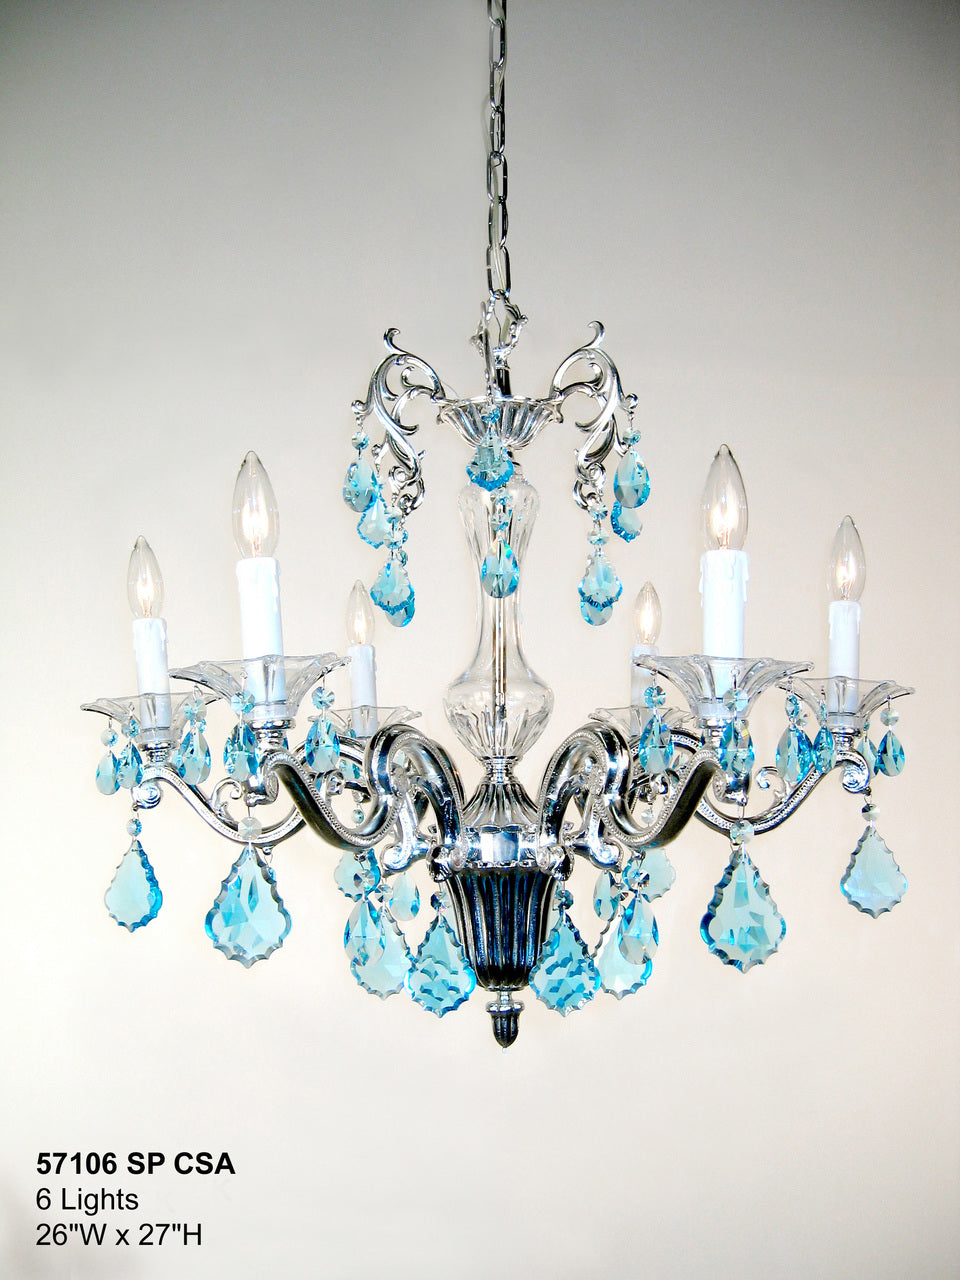 Classic Lighting 57106 SP IRC Via Firenze Crystal Chandelier in Silver (Imported from Spain)